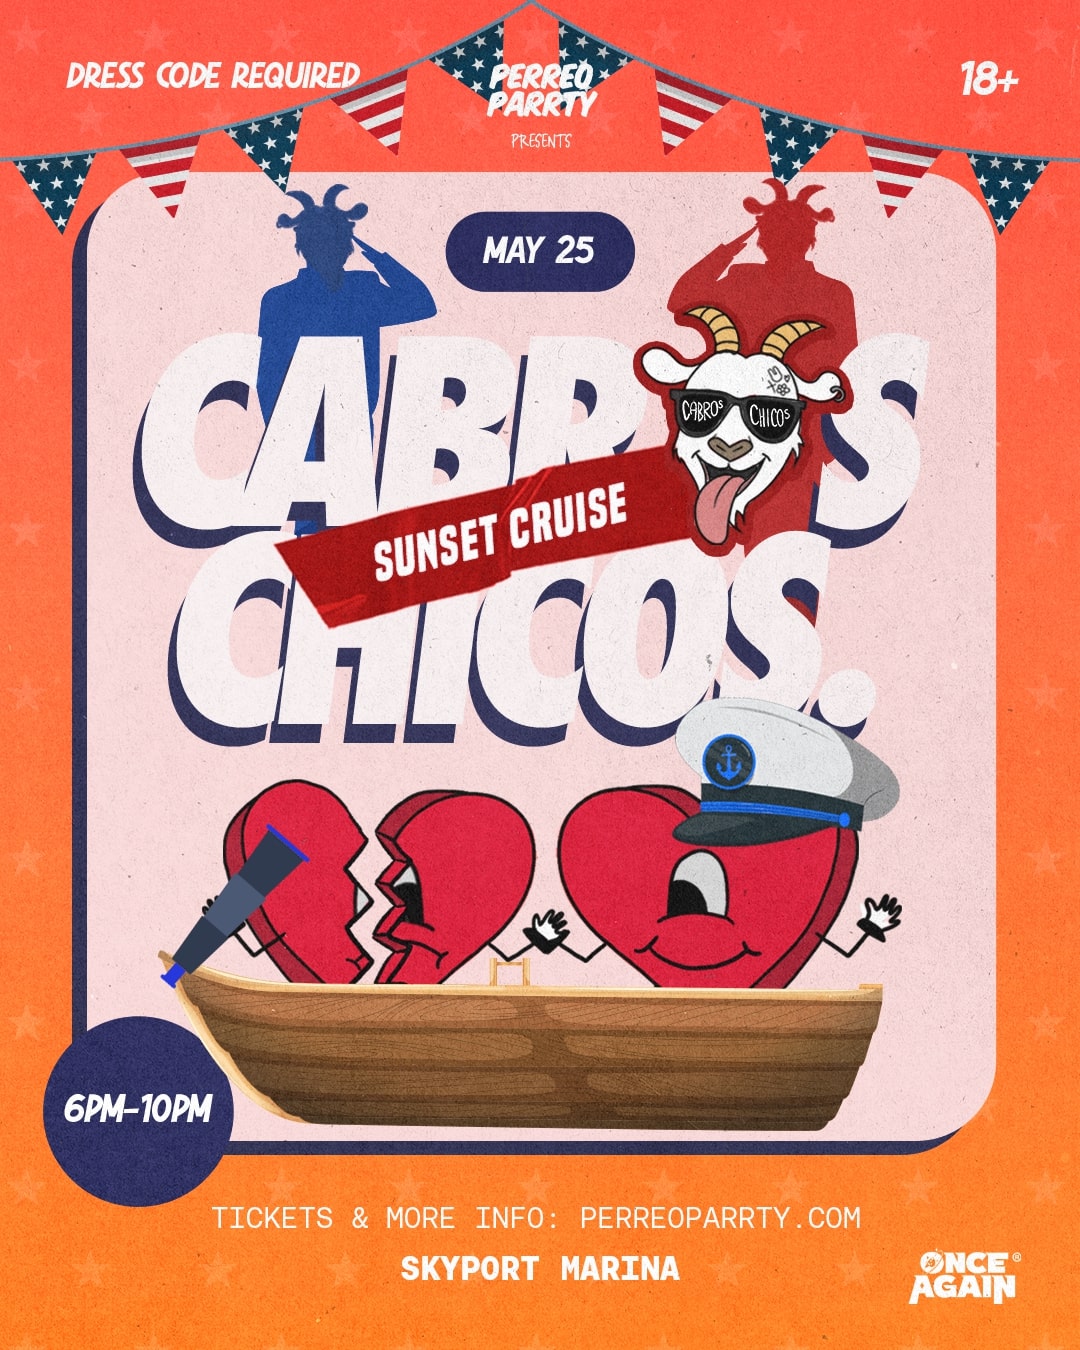 Cabros Chicos 18+ Latin & Hip-Hop Sunset Boat Party (Two Floors of Music)